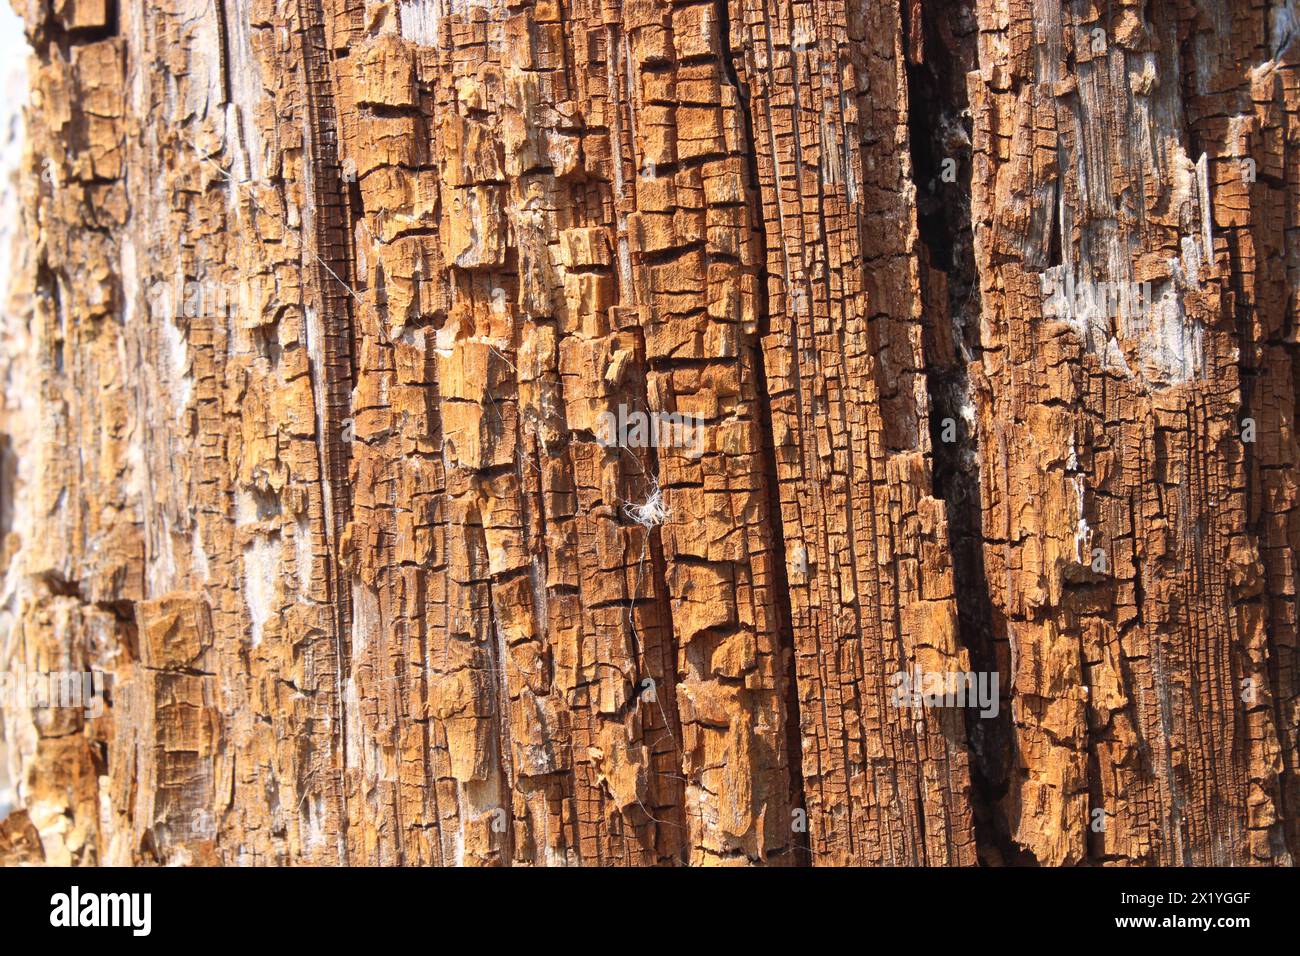 Texture. Old wood. Pine Trunk Stock Photo